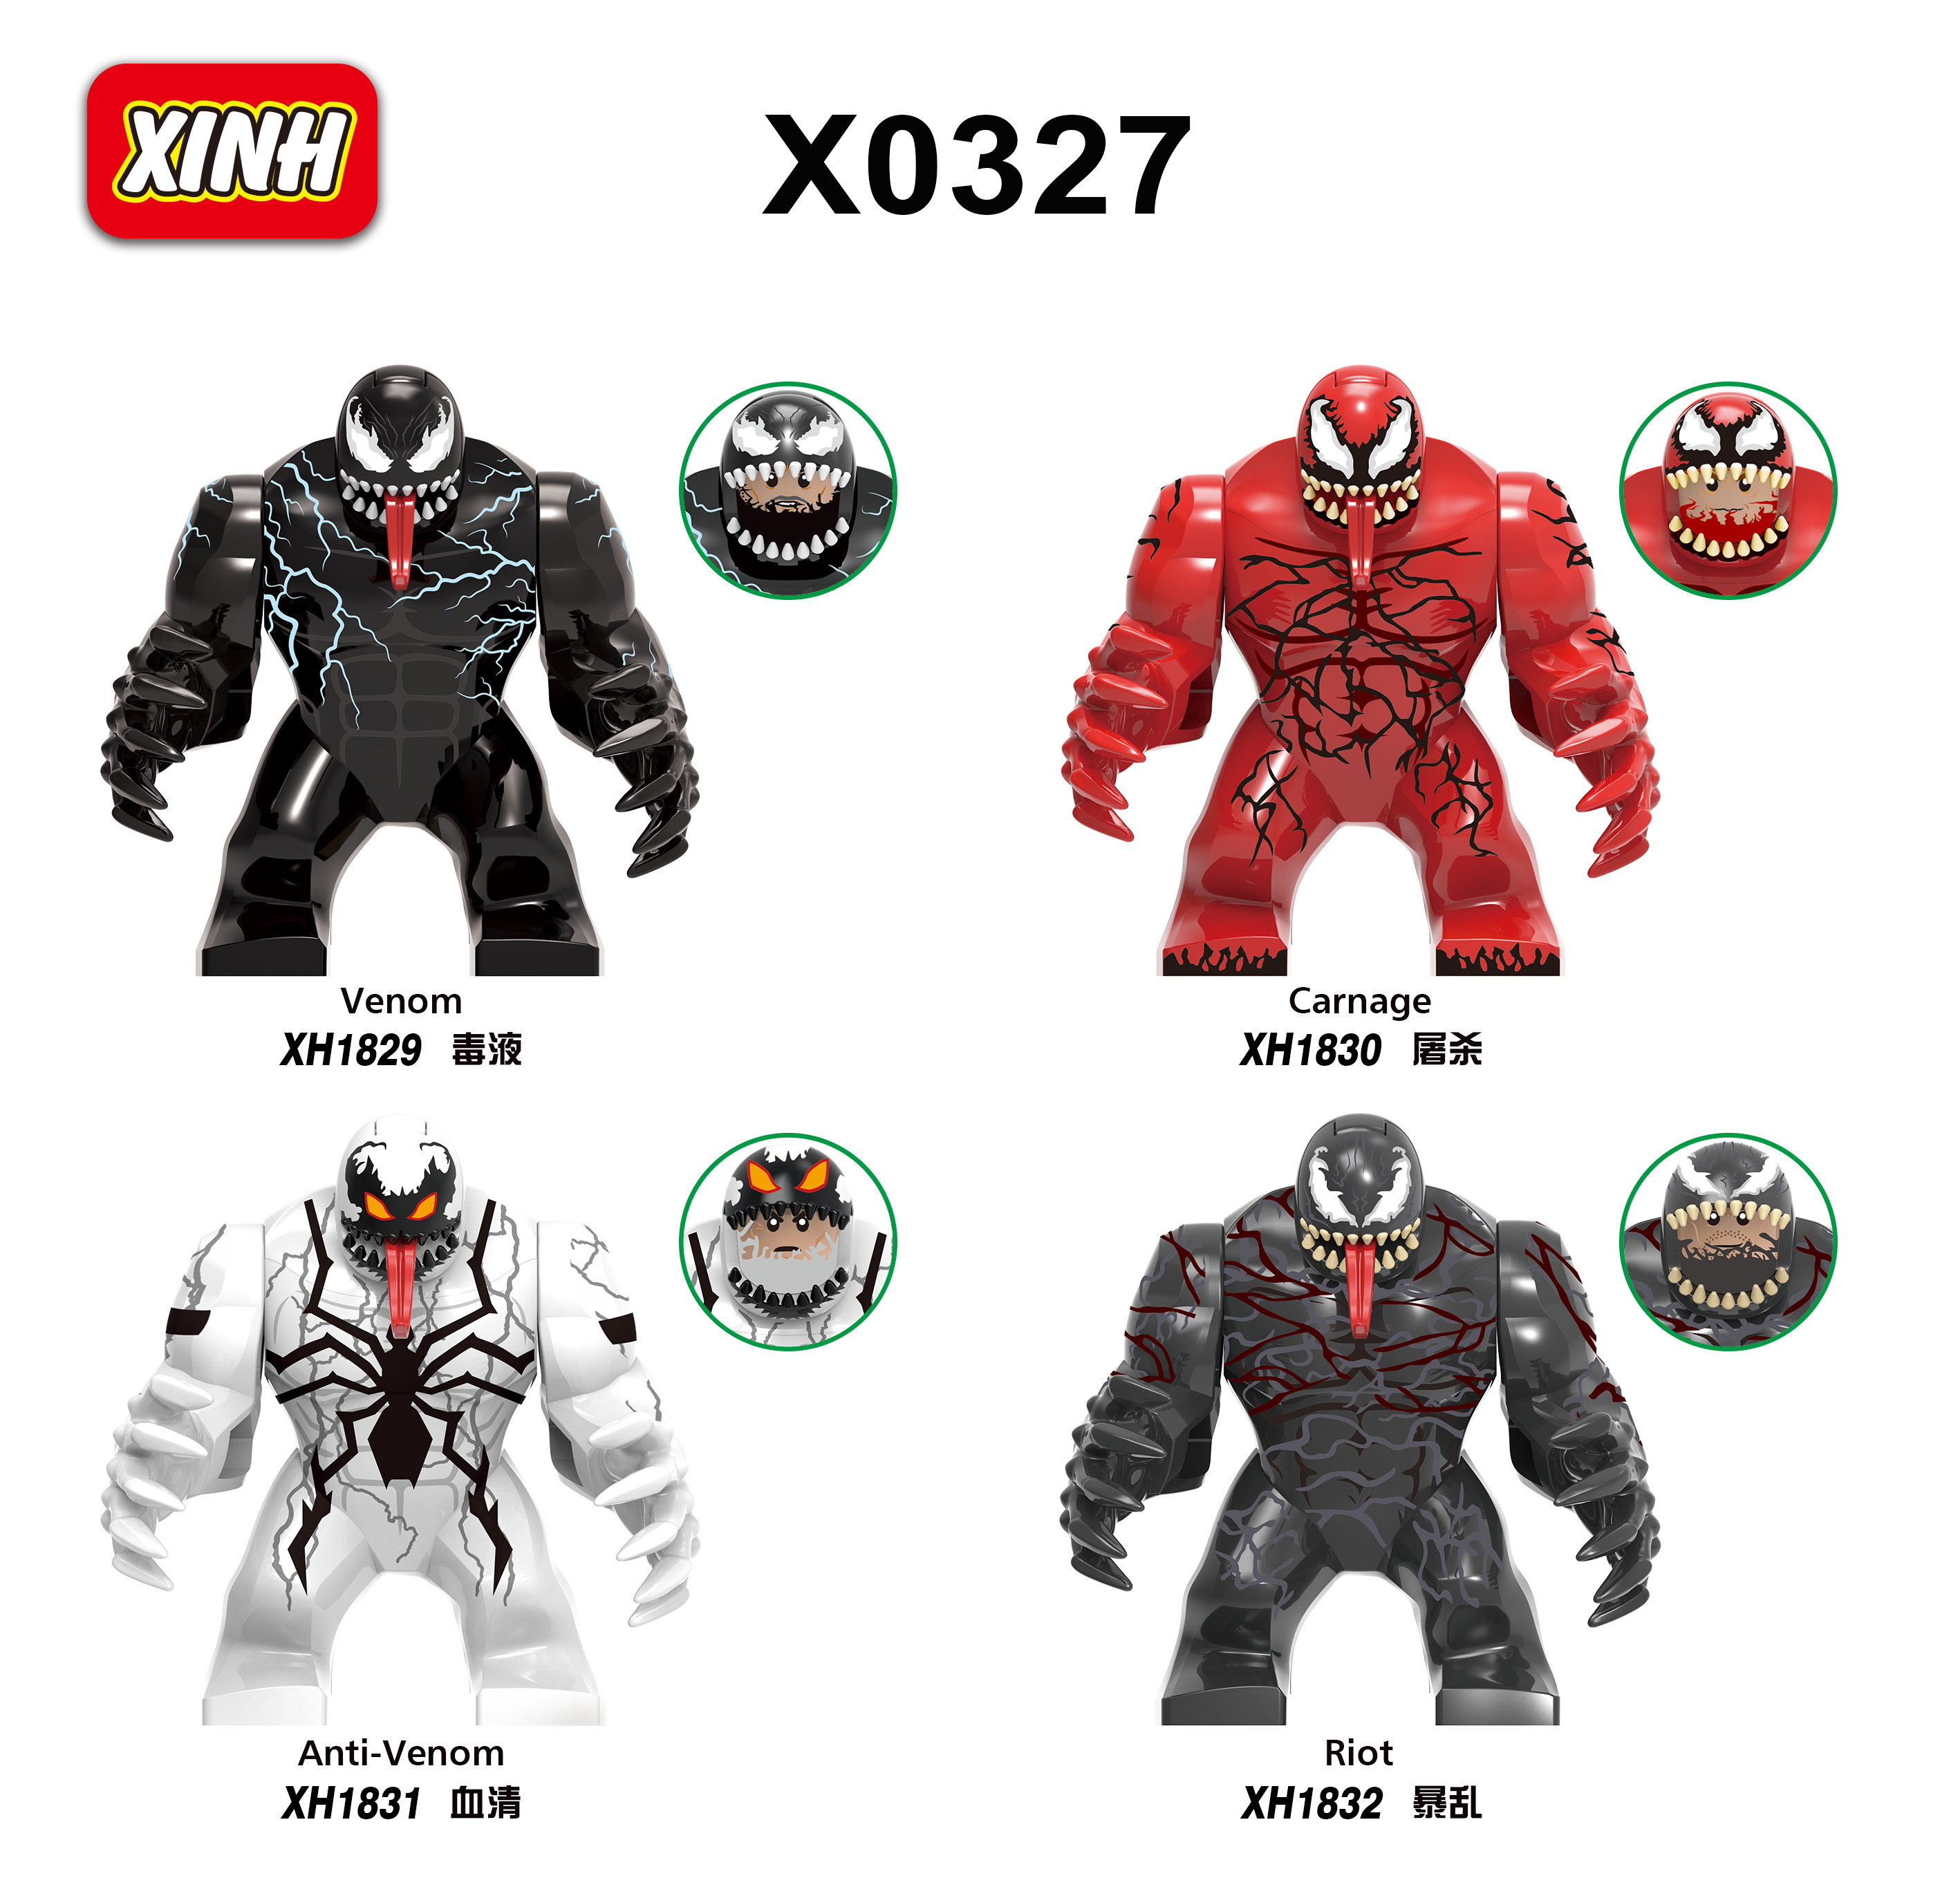 XH1829 XH1830 XH1831 XH1832 X0327 Big Model Super Heroes Venom Carnage Movie Series Building Blocks Action Figures Educational Toys For Kids Gifts